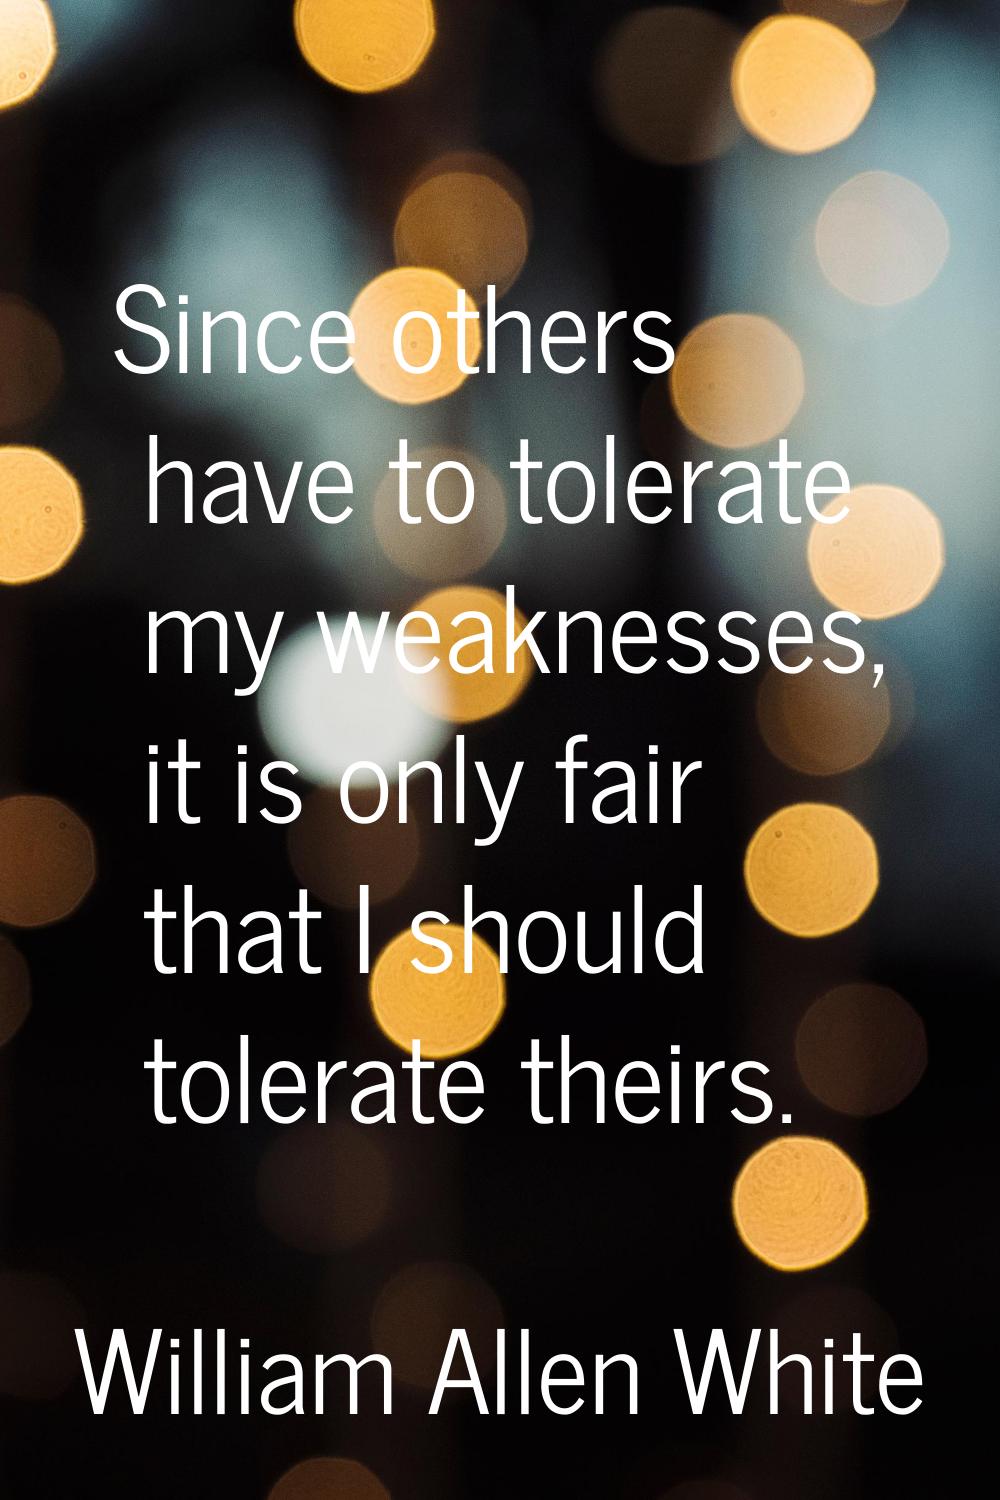 Since others have to tolerate my weaknesses, it is only fair that I should tolerate theirs.